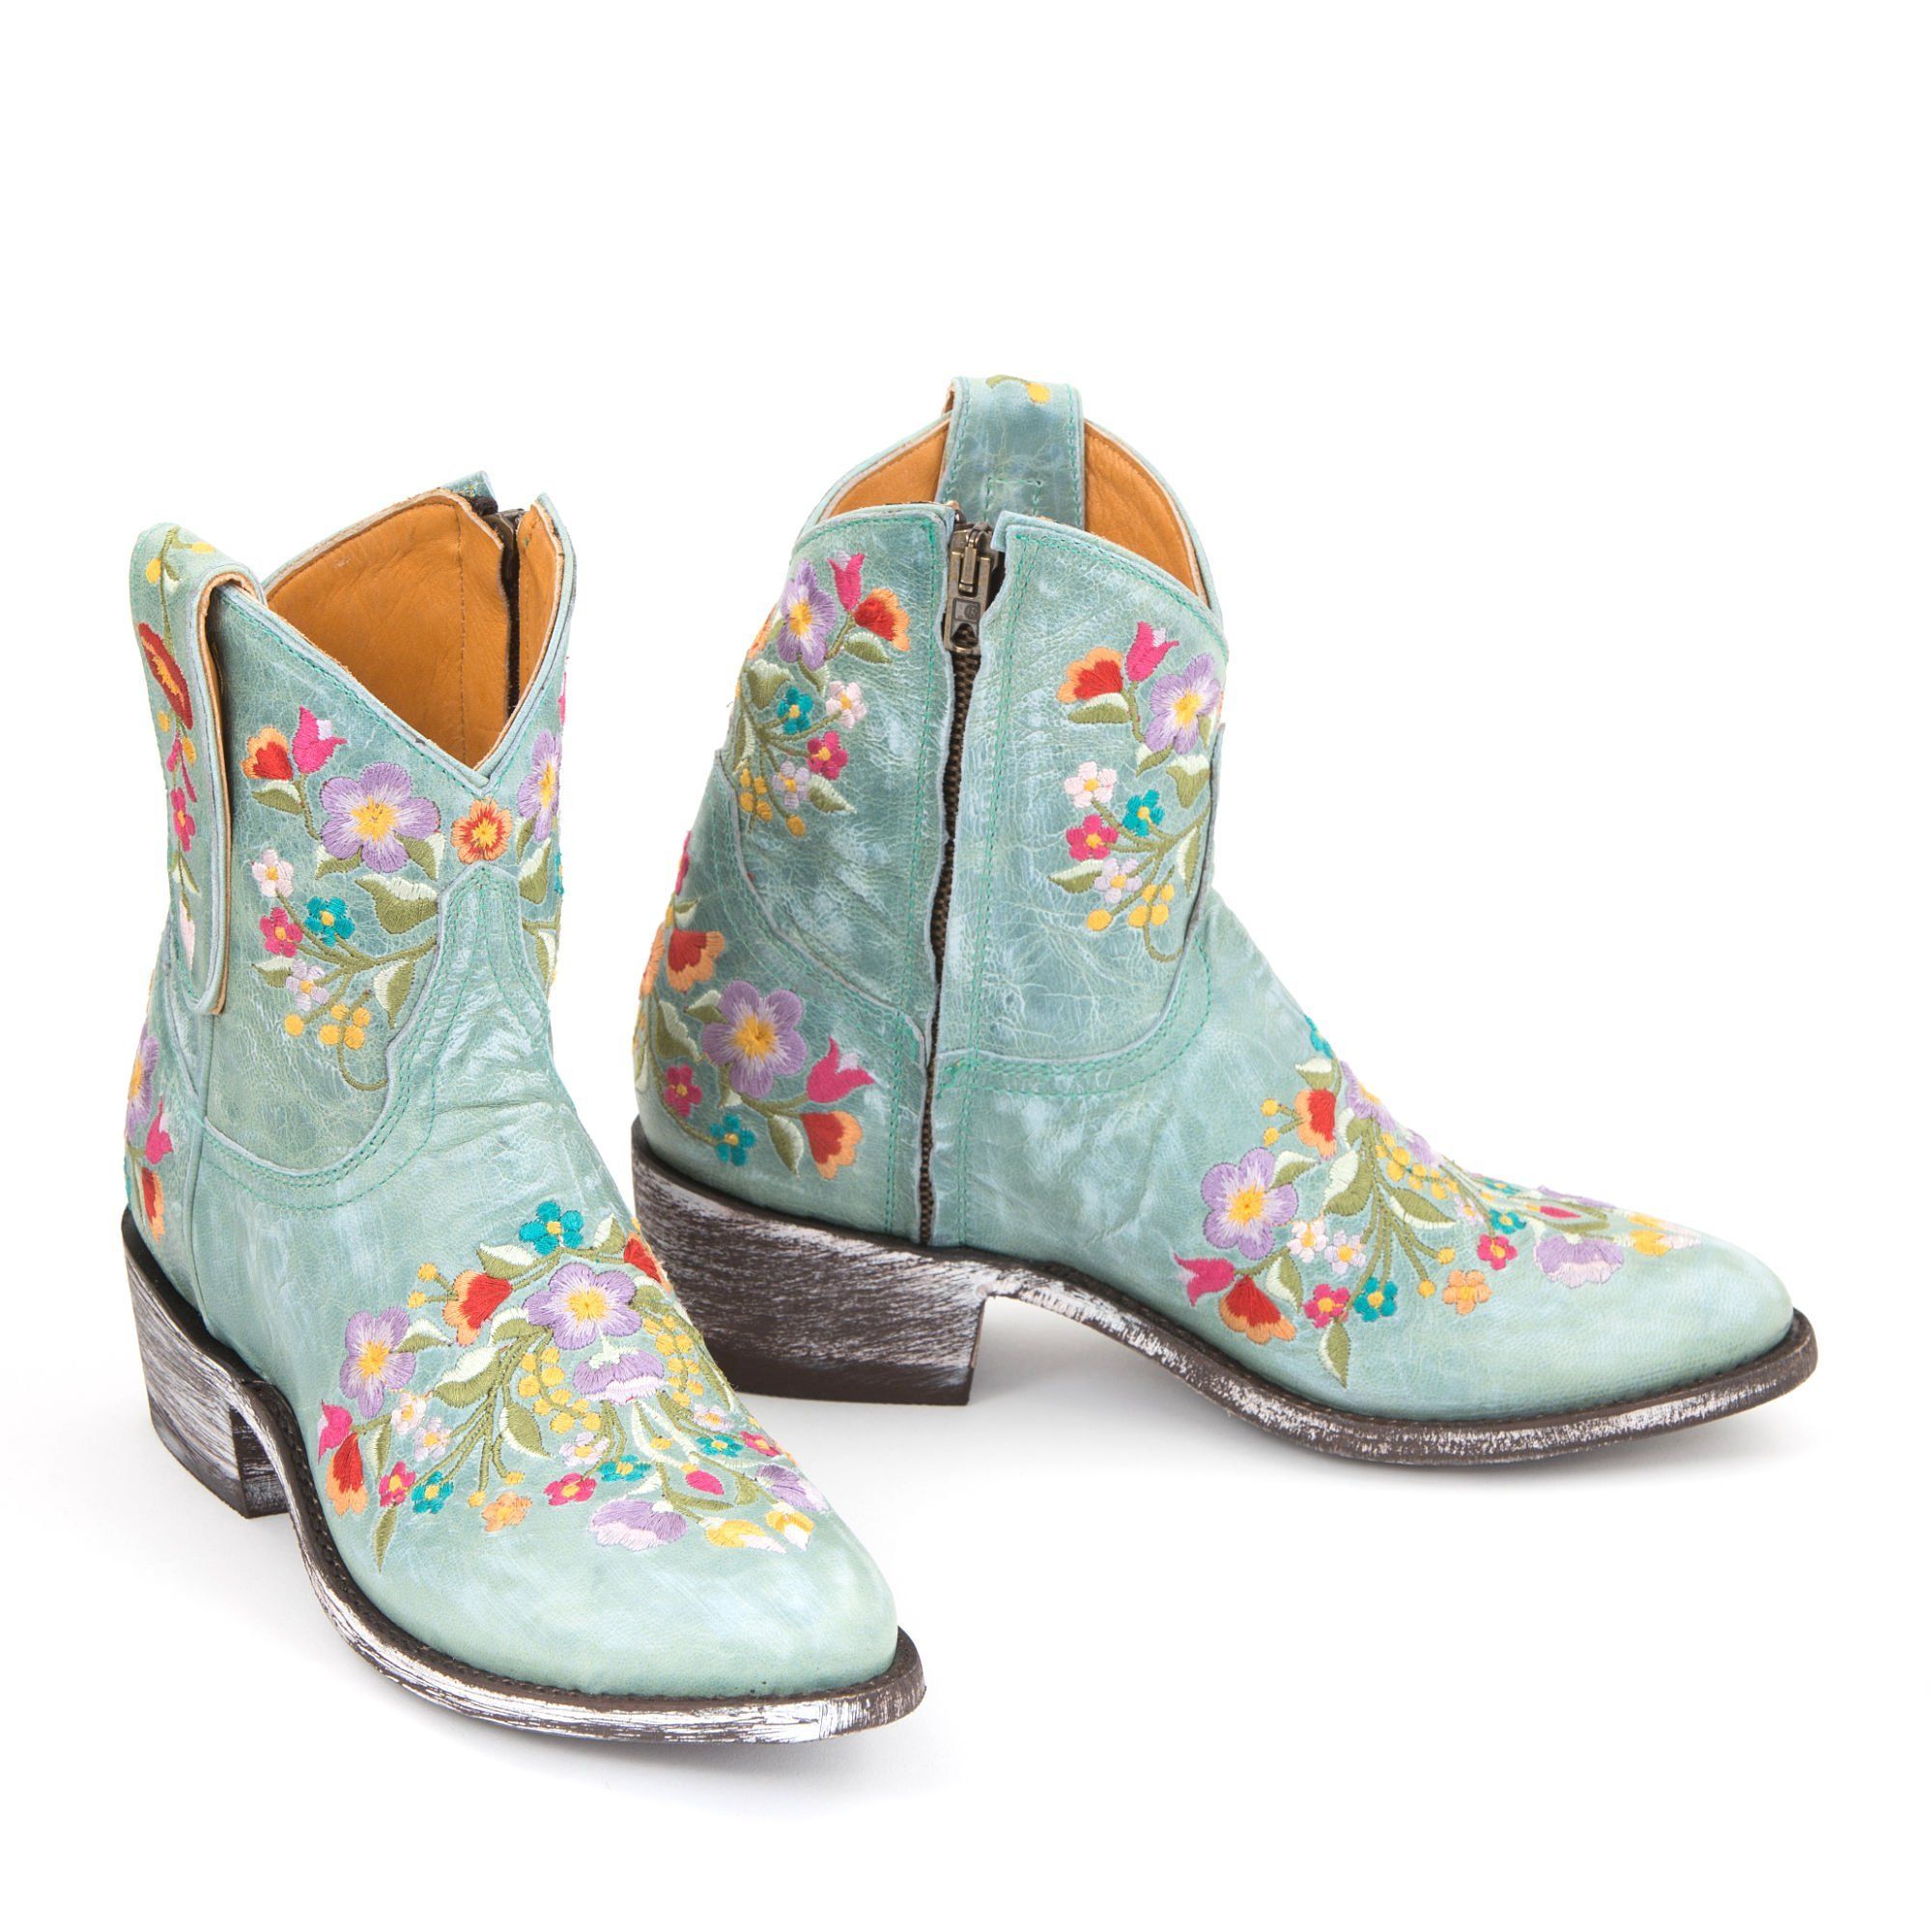 SORAZIPPER 7'' Aqua ROUNDED TOE ANKLE BOOTS WITH FLOWER STITCHING  AND SIDE ZIP CLOSURE  Total heel height 1.8 Inches  100% cow 